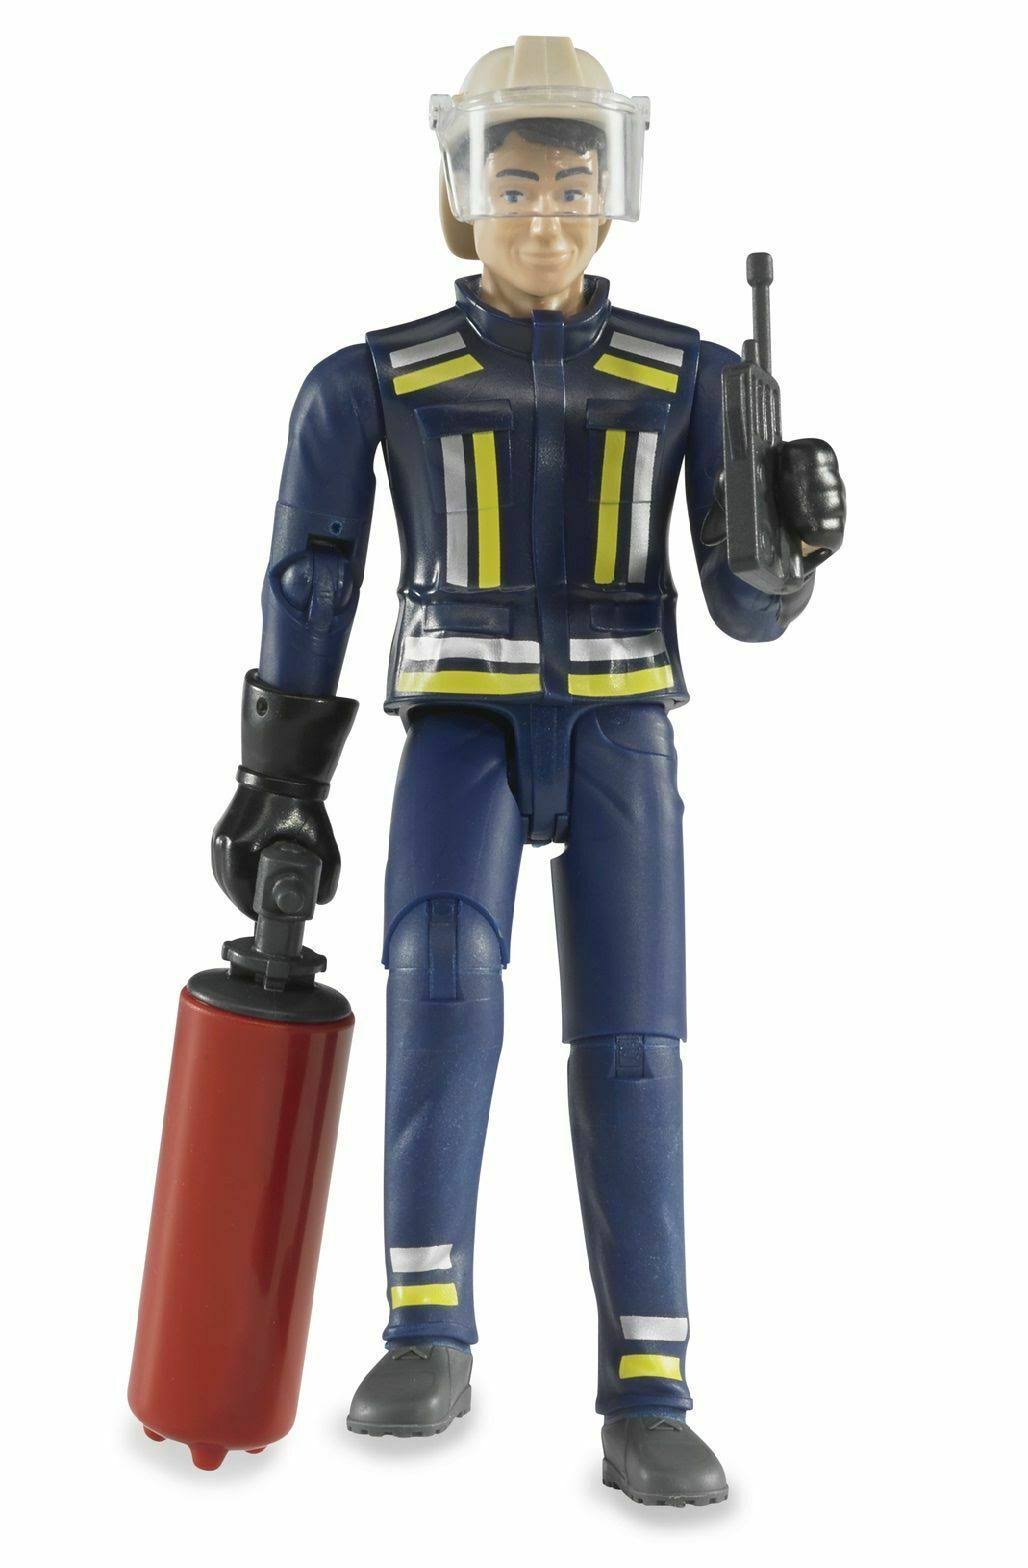 Bruder Fireman with Accessories